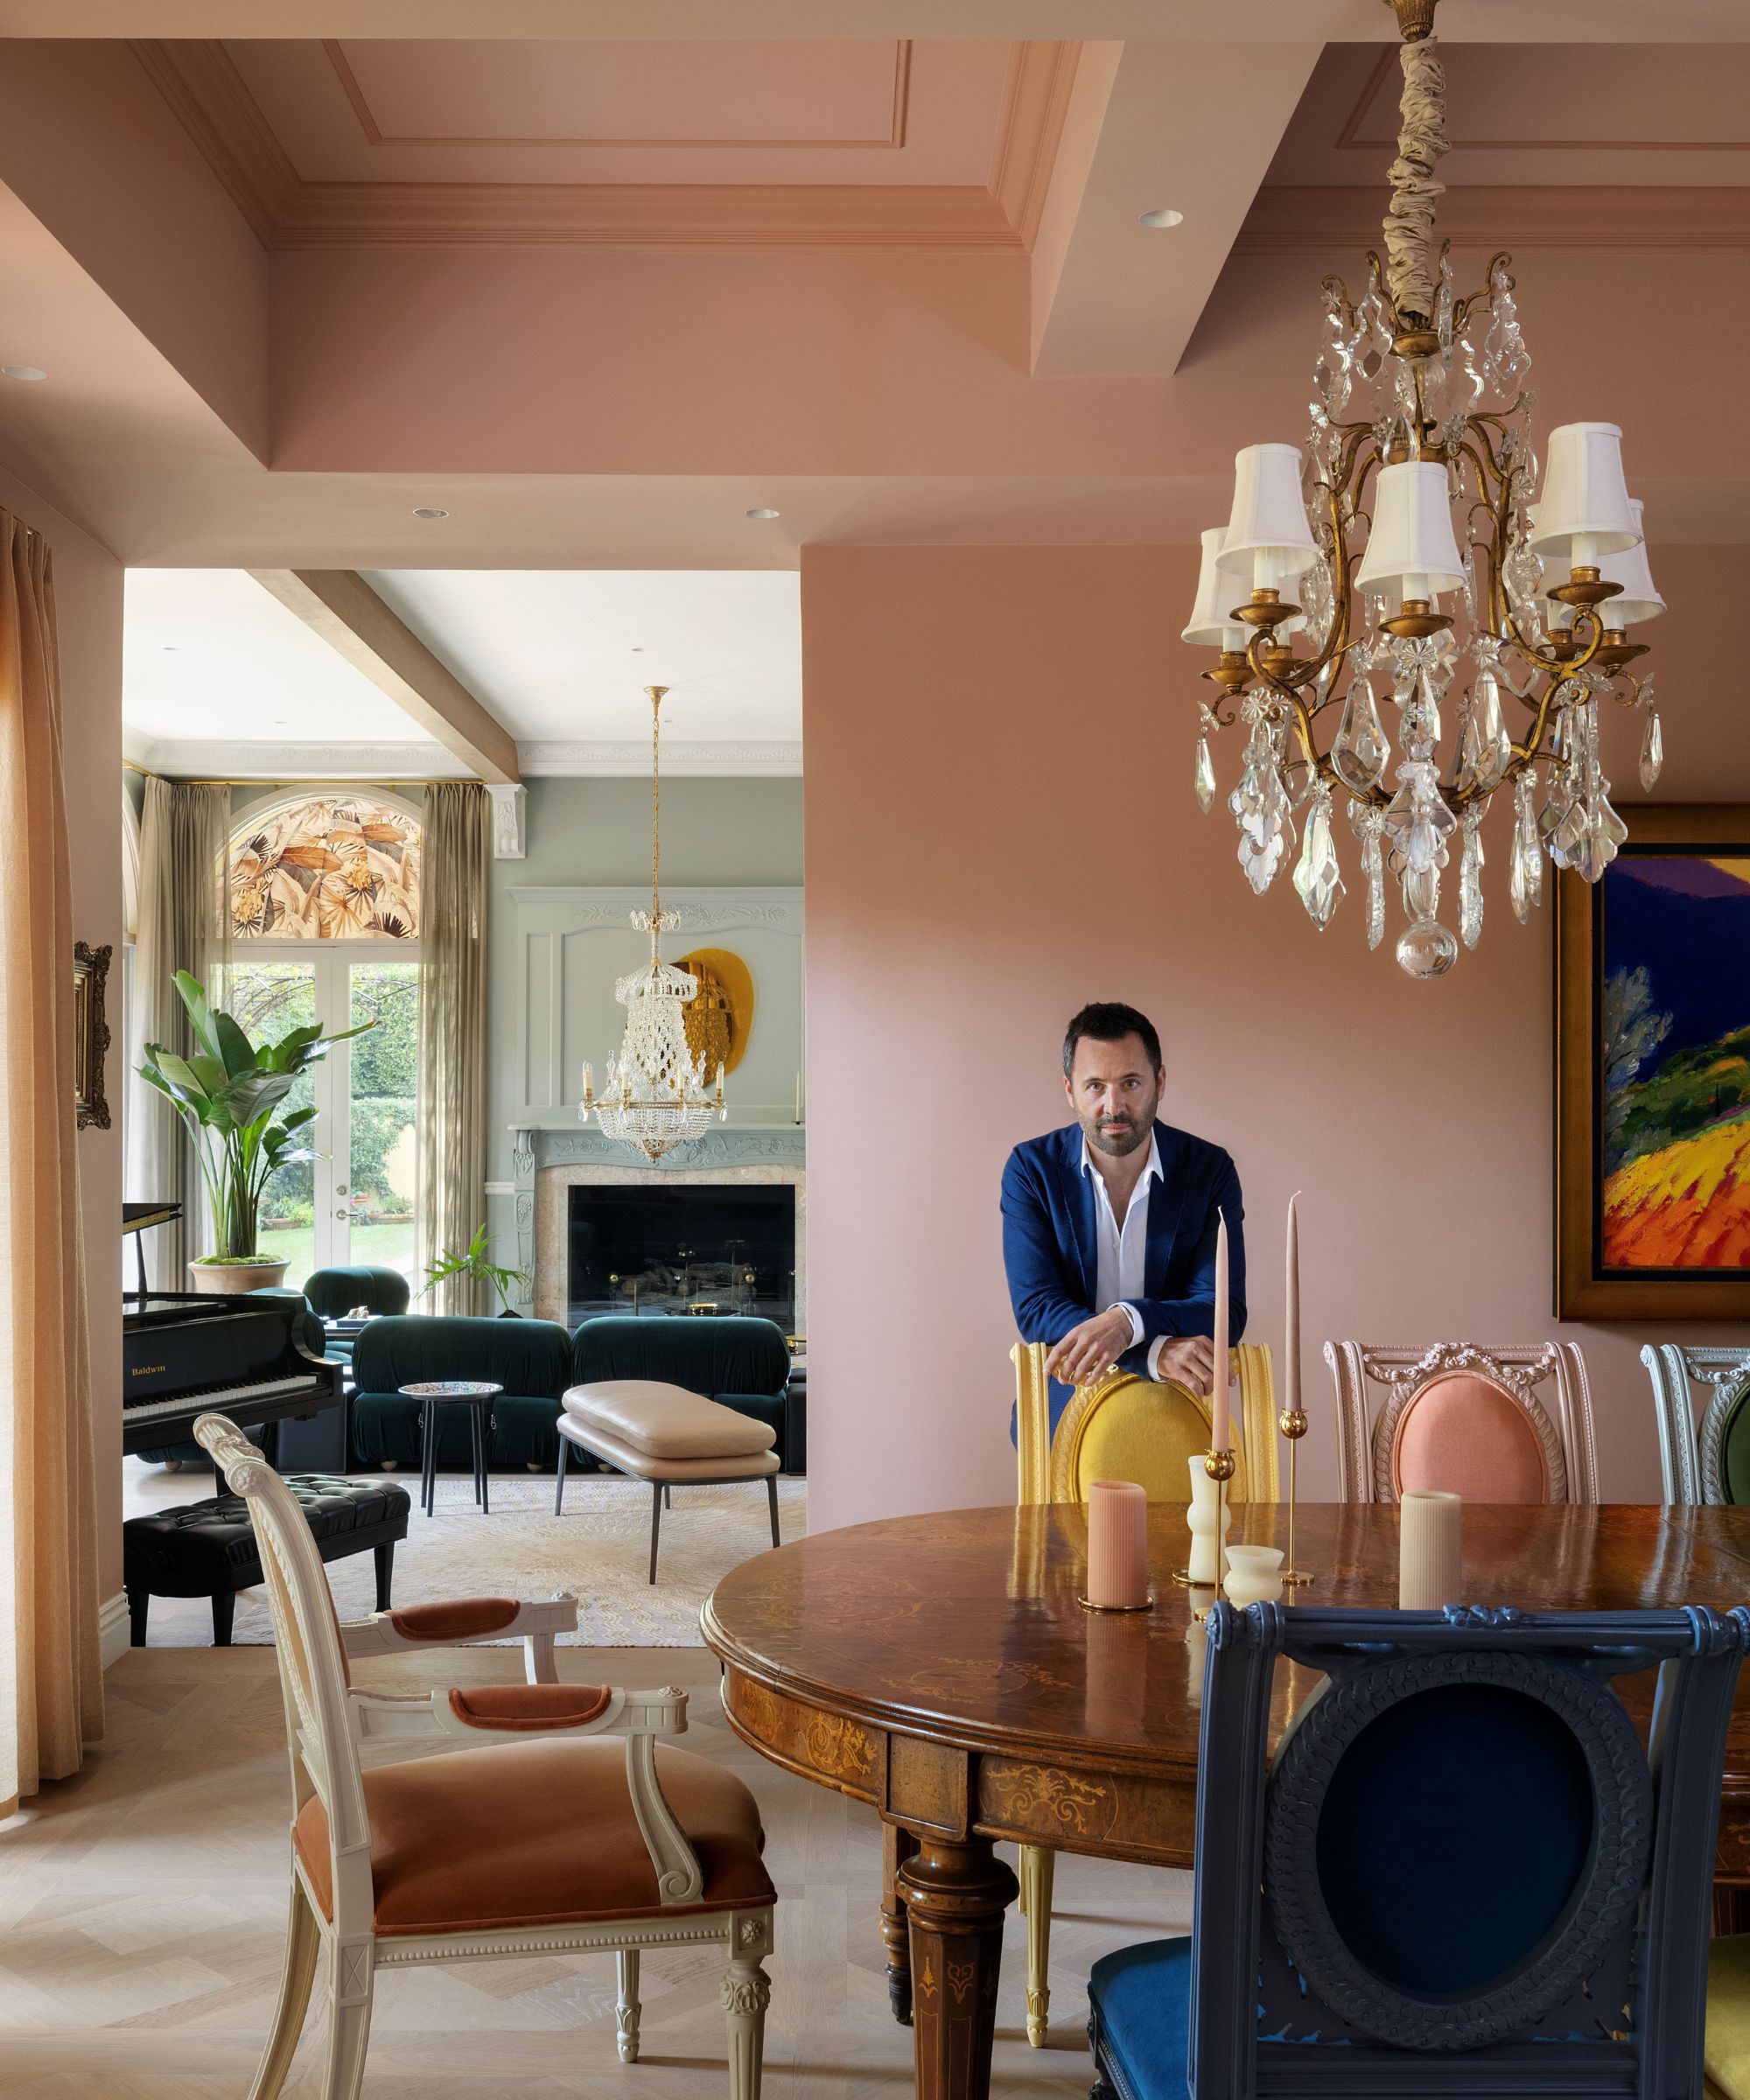 Designer Tancred Vilucchi in an LA dining room with pink walls